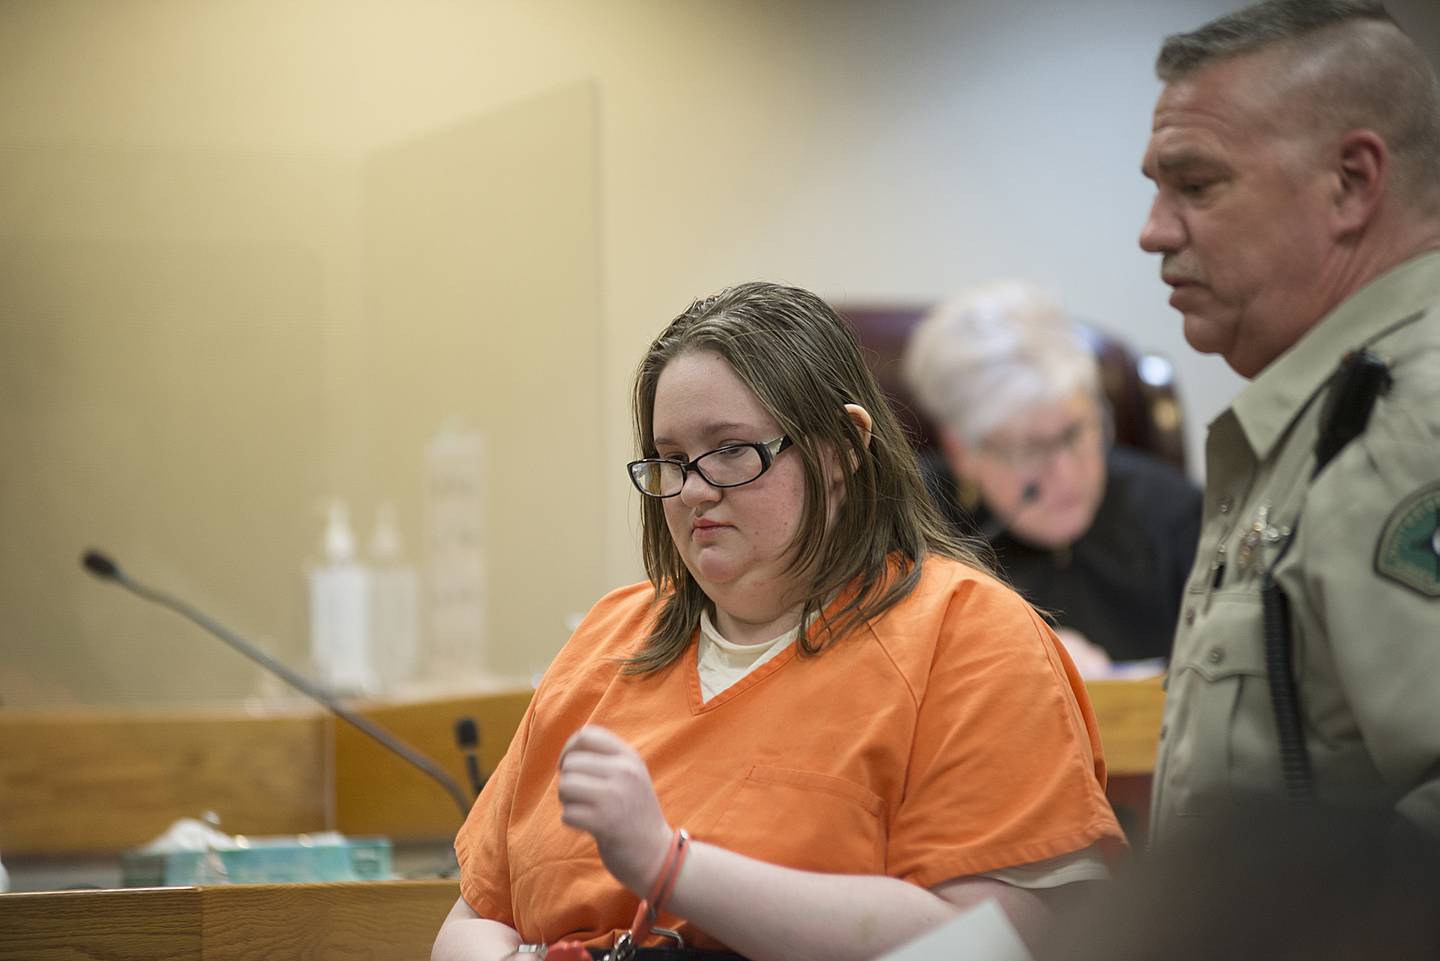 Rachel Helm is escorted out of the Whiteside County courtroom Wednesday, March 9, 2022 after agreeing to a plea deal in the death of Peggy Schroeder. For her part in the death Helm received 11 and half years in prison.